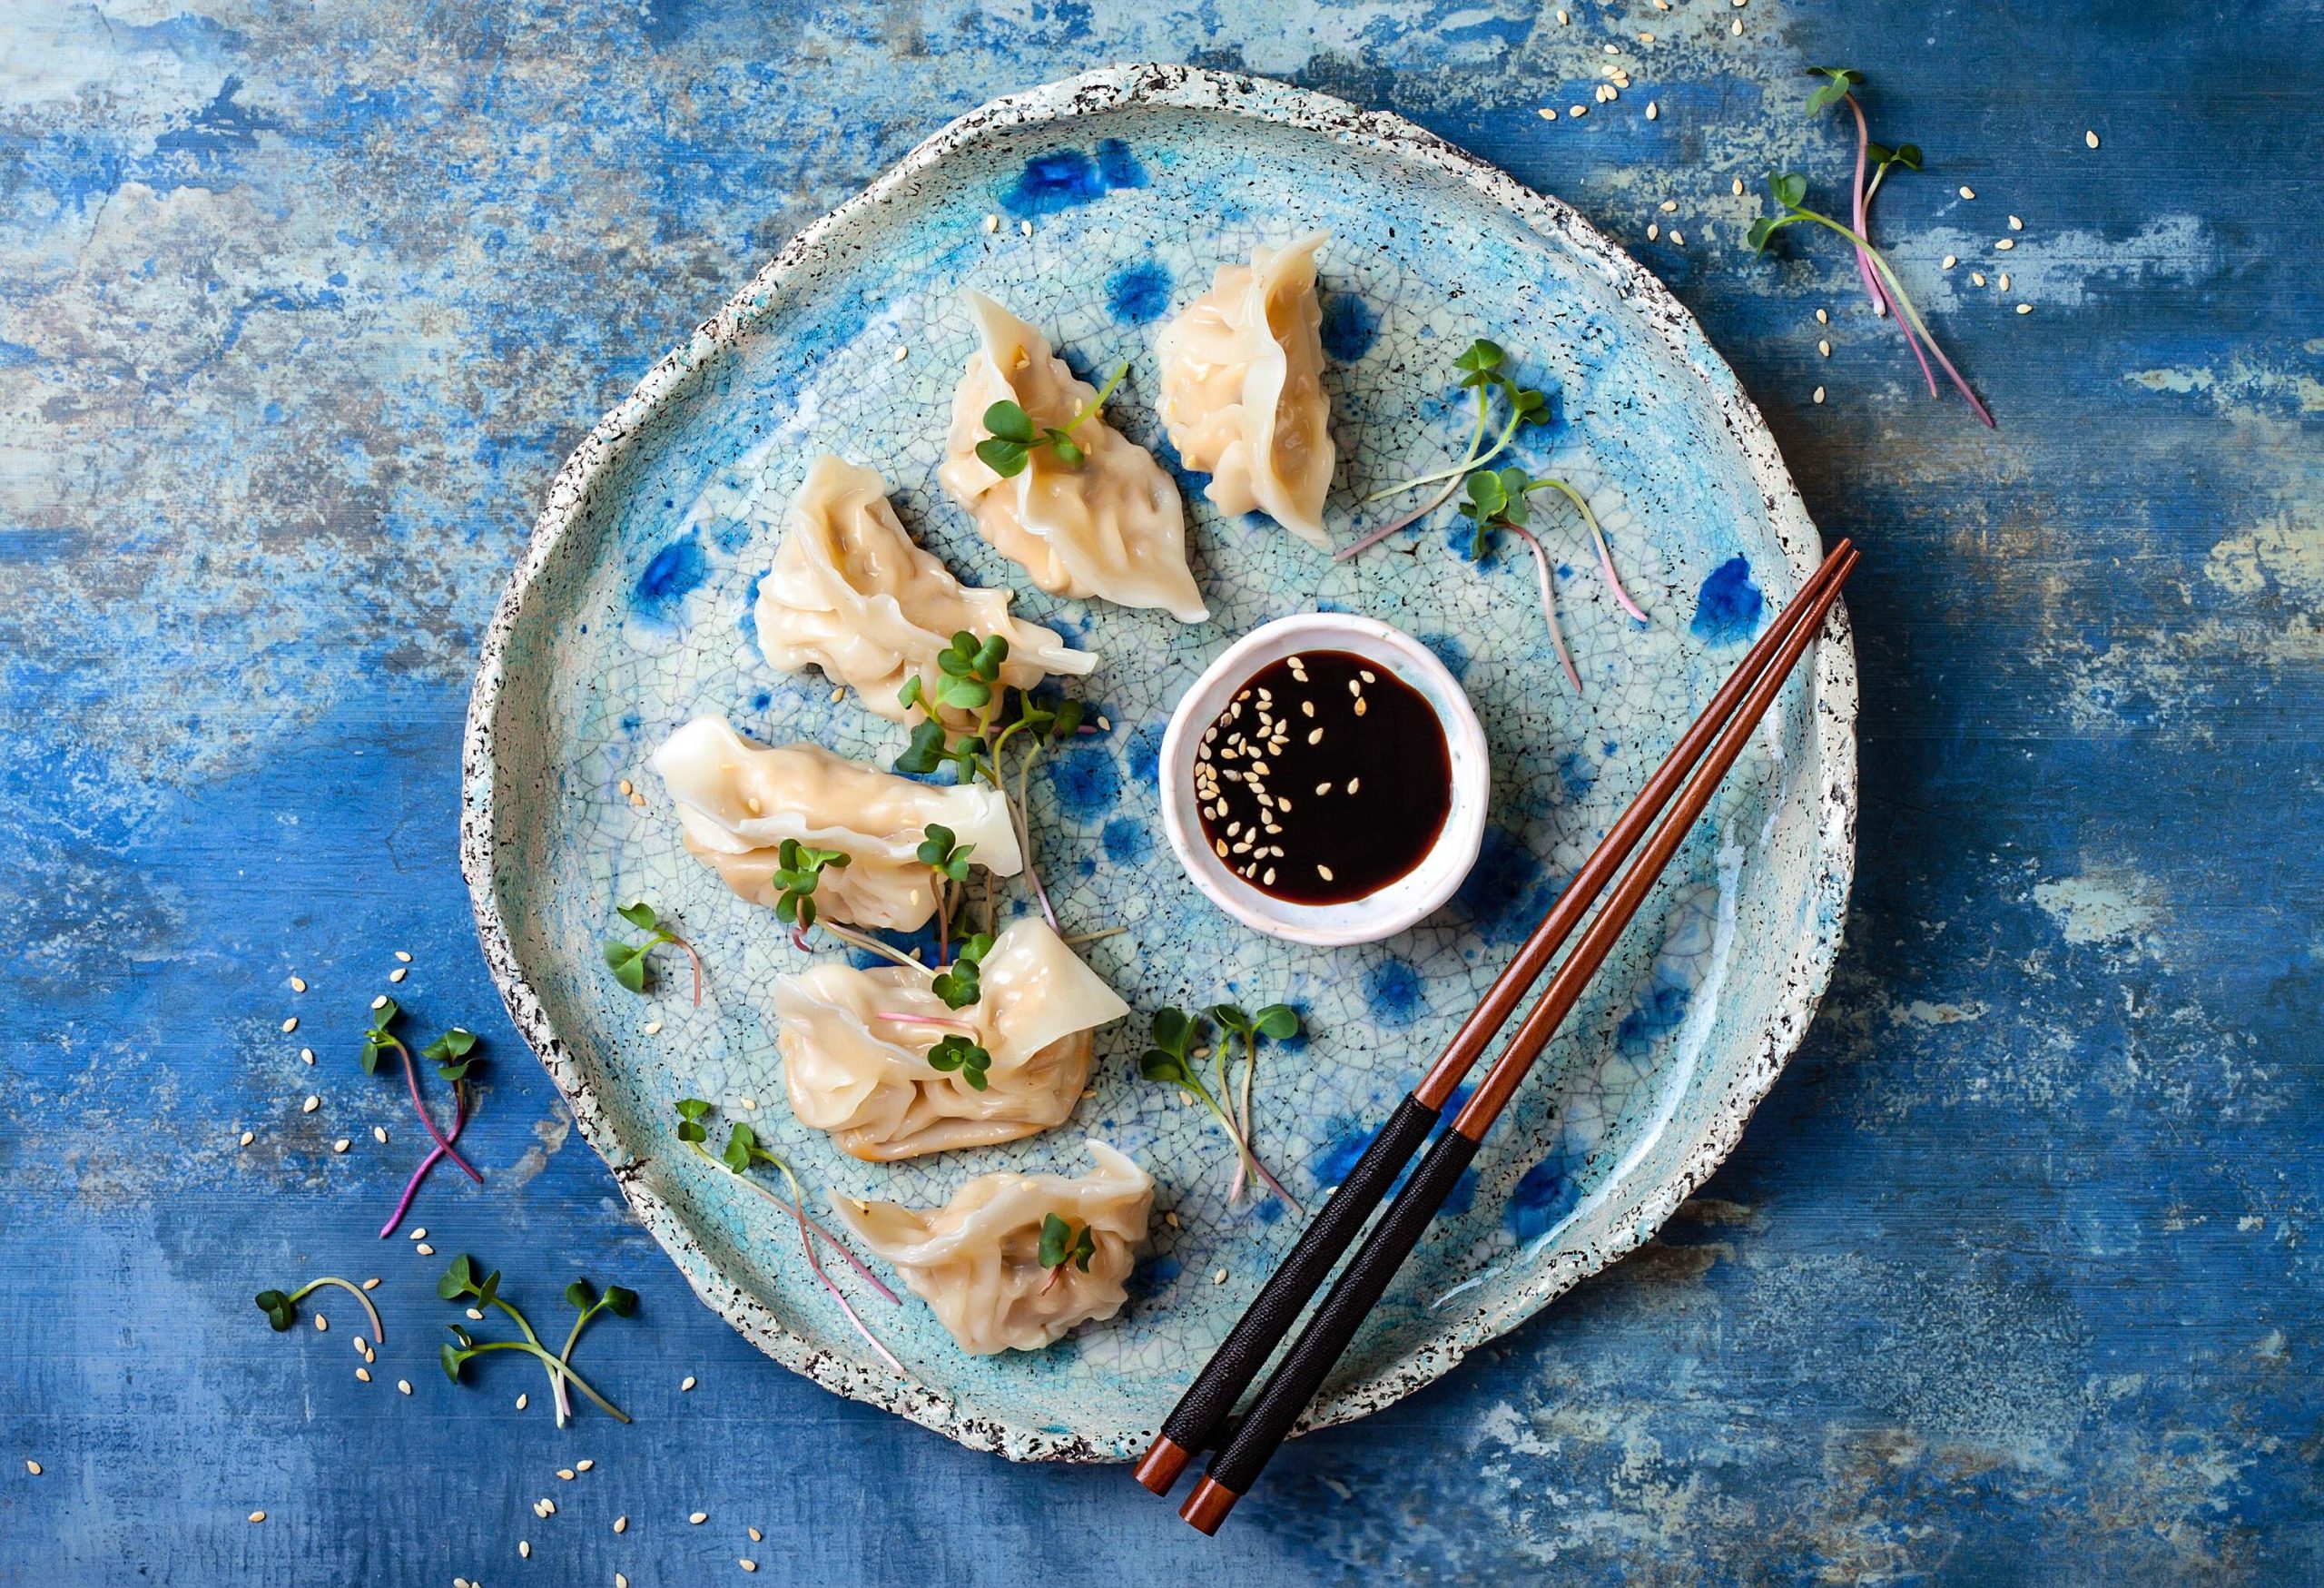 Chinese dumplings served with sesame seeds soy sauce and chopsticks.